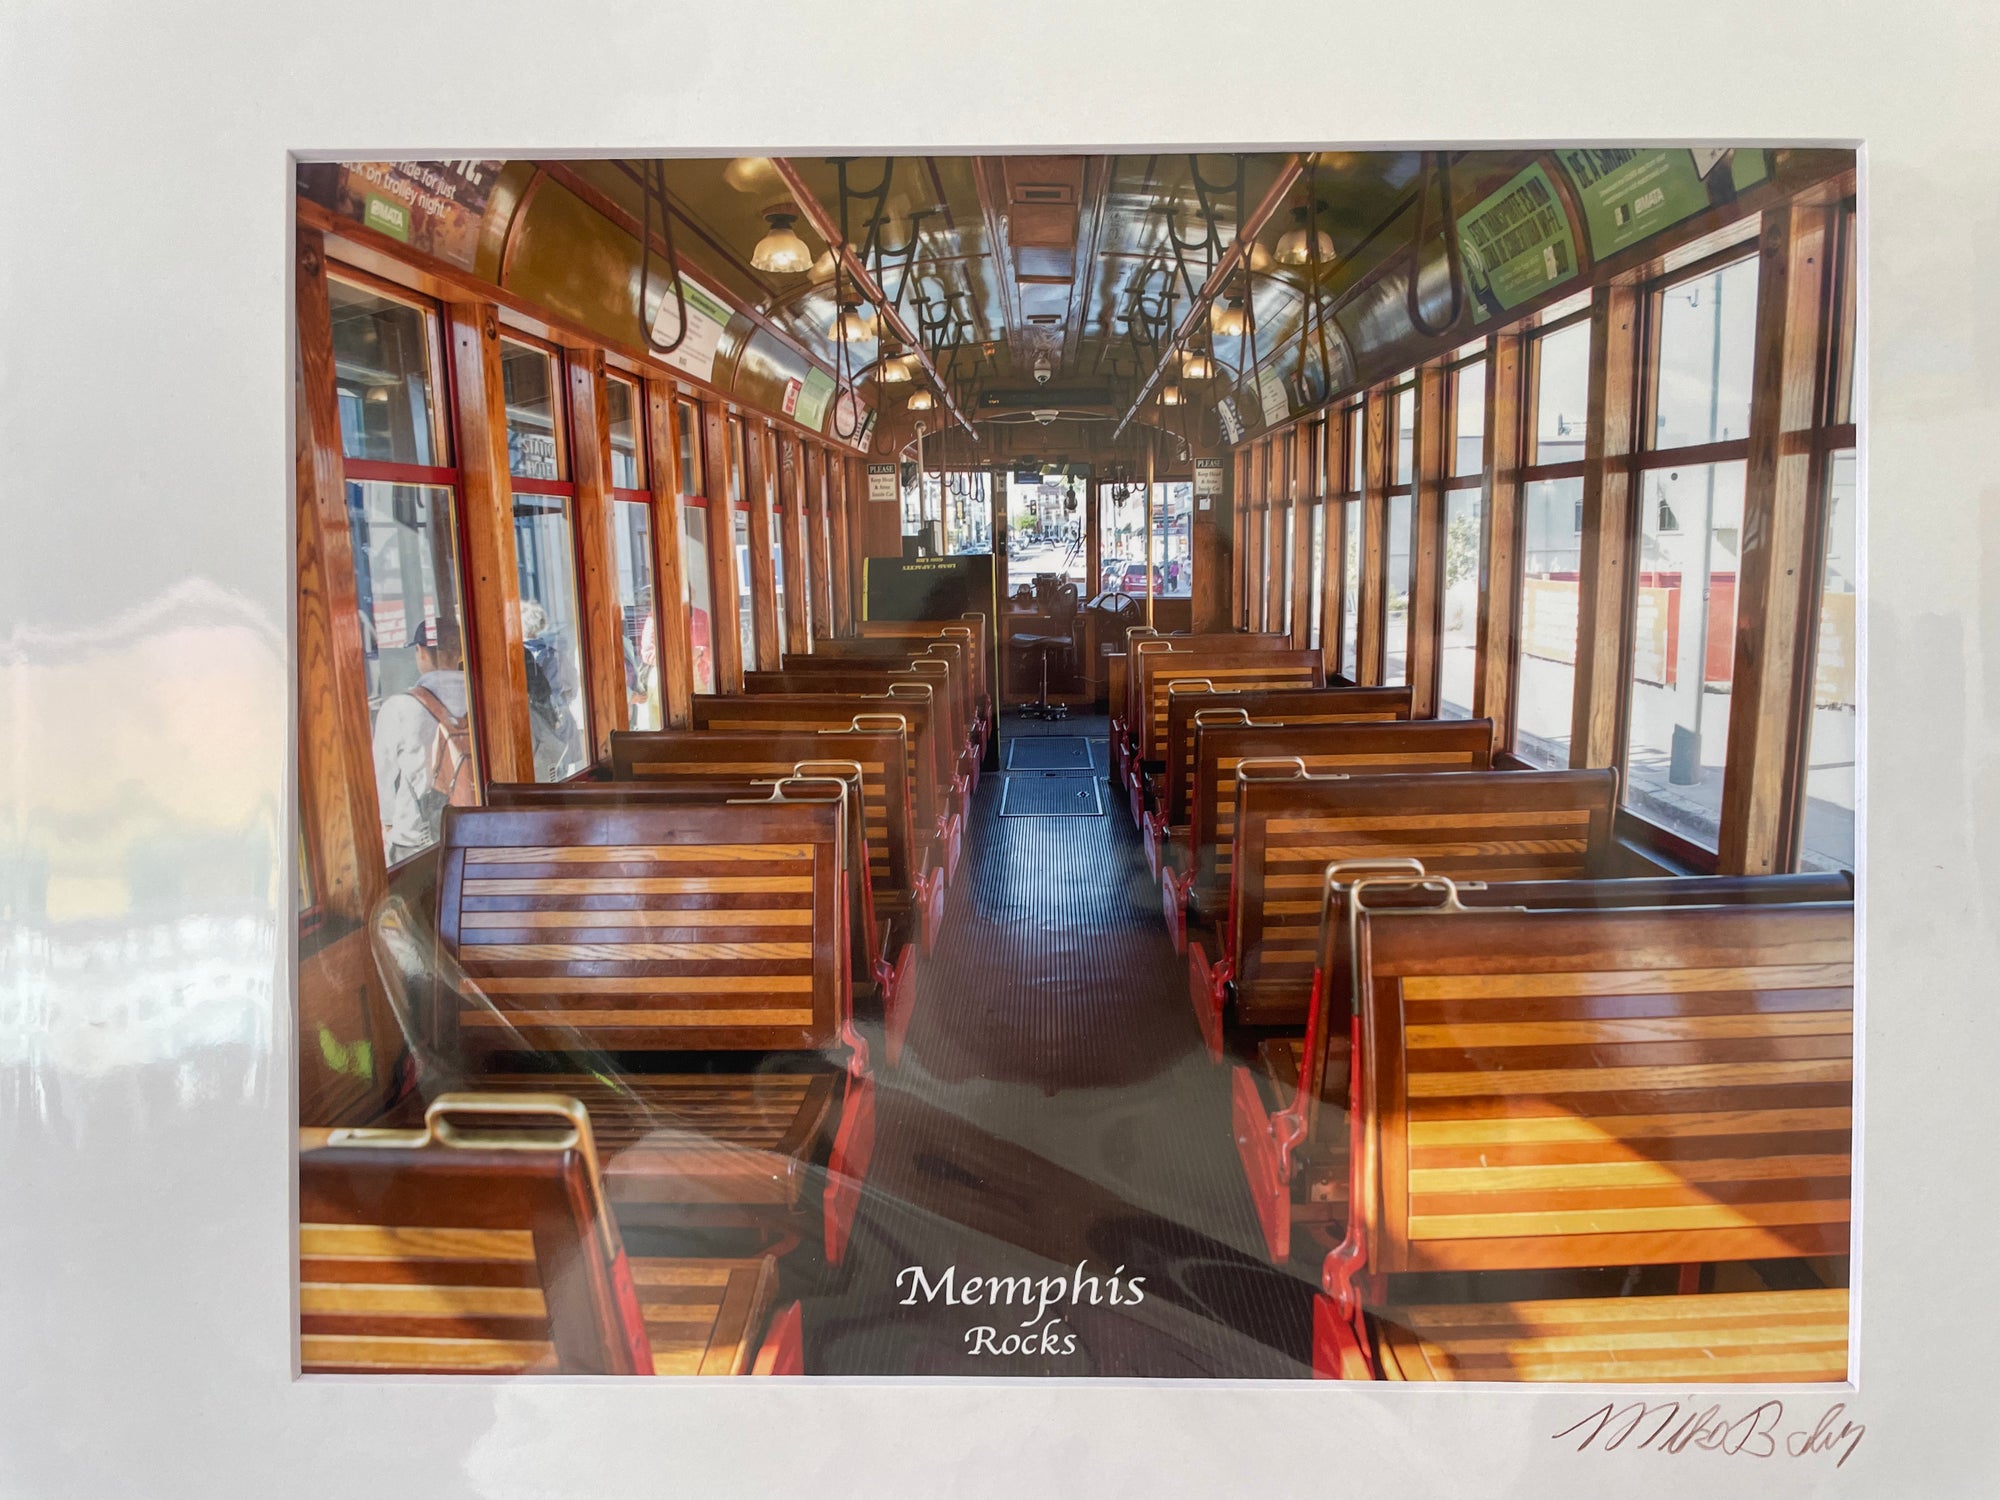 165 Inside a Main Street Trolley Photograph by Mike Baber